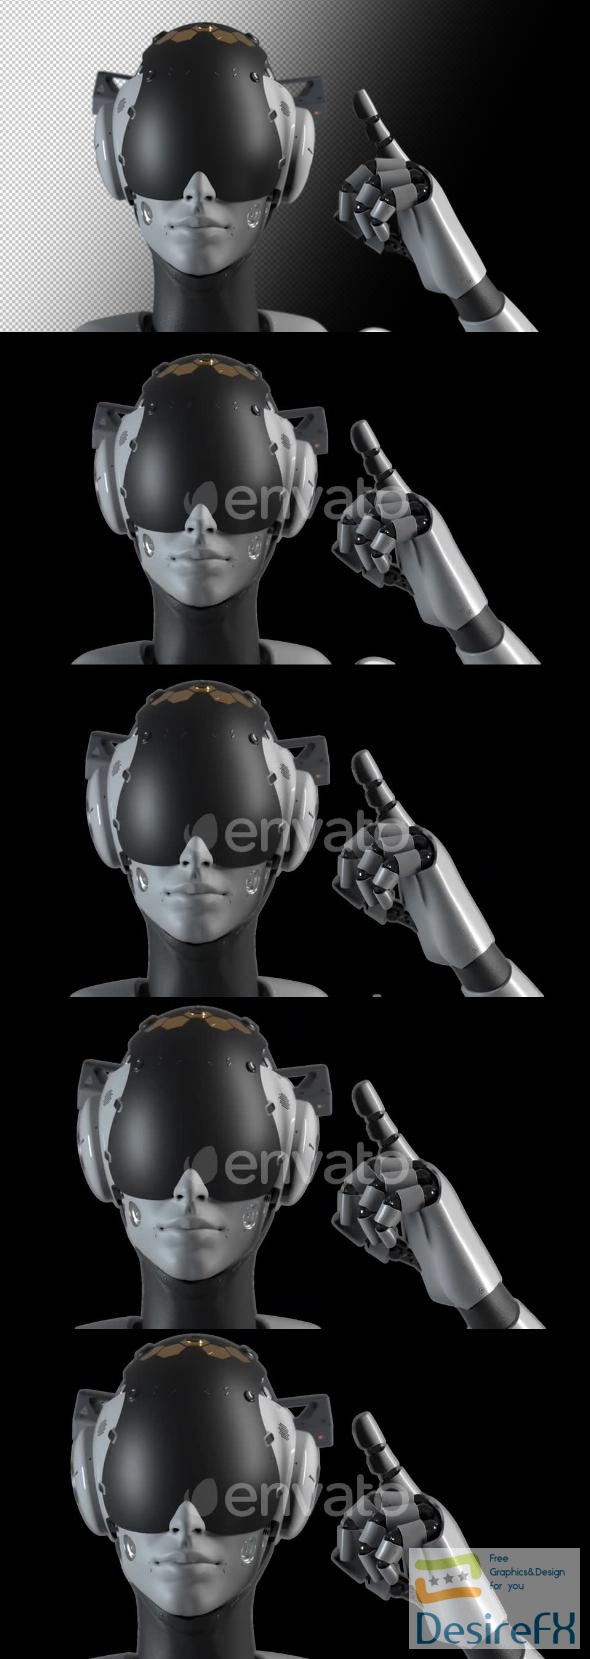 VideoHive portrait of a robot, the robot makes a hand gesture indicating the importance of information. 47550696